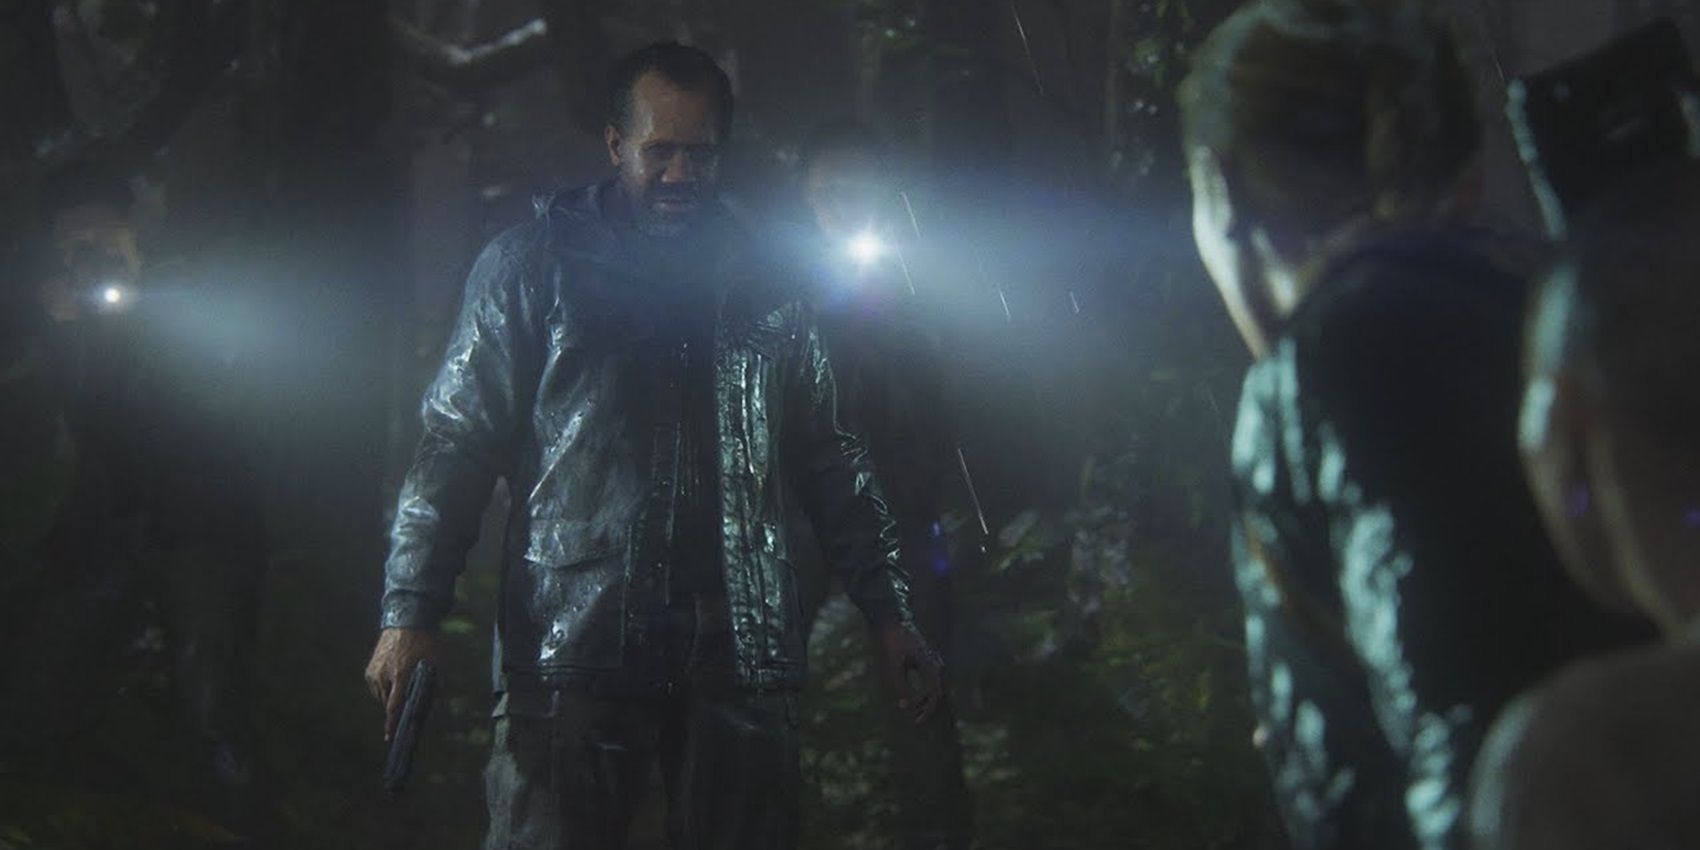 Isaac confronts Abby in the woods in The Last of Us Part II